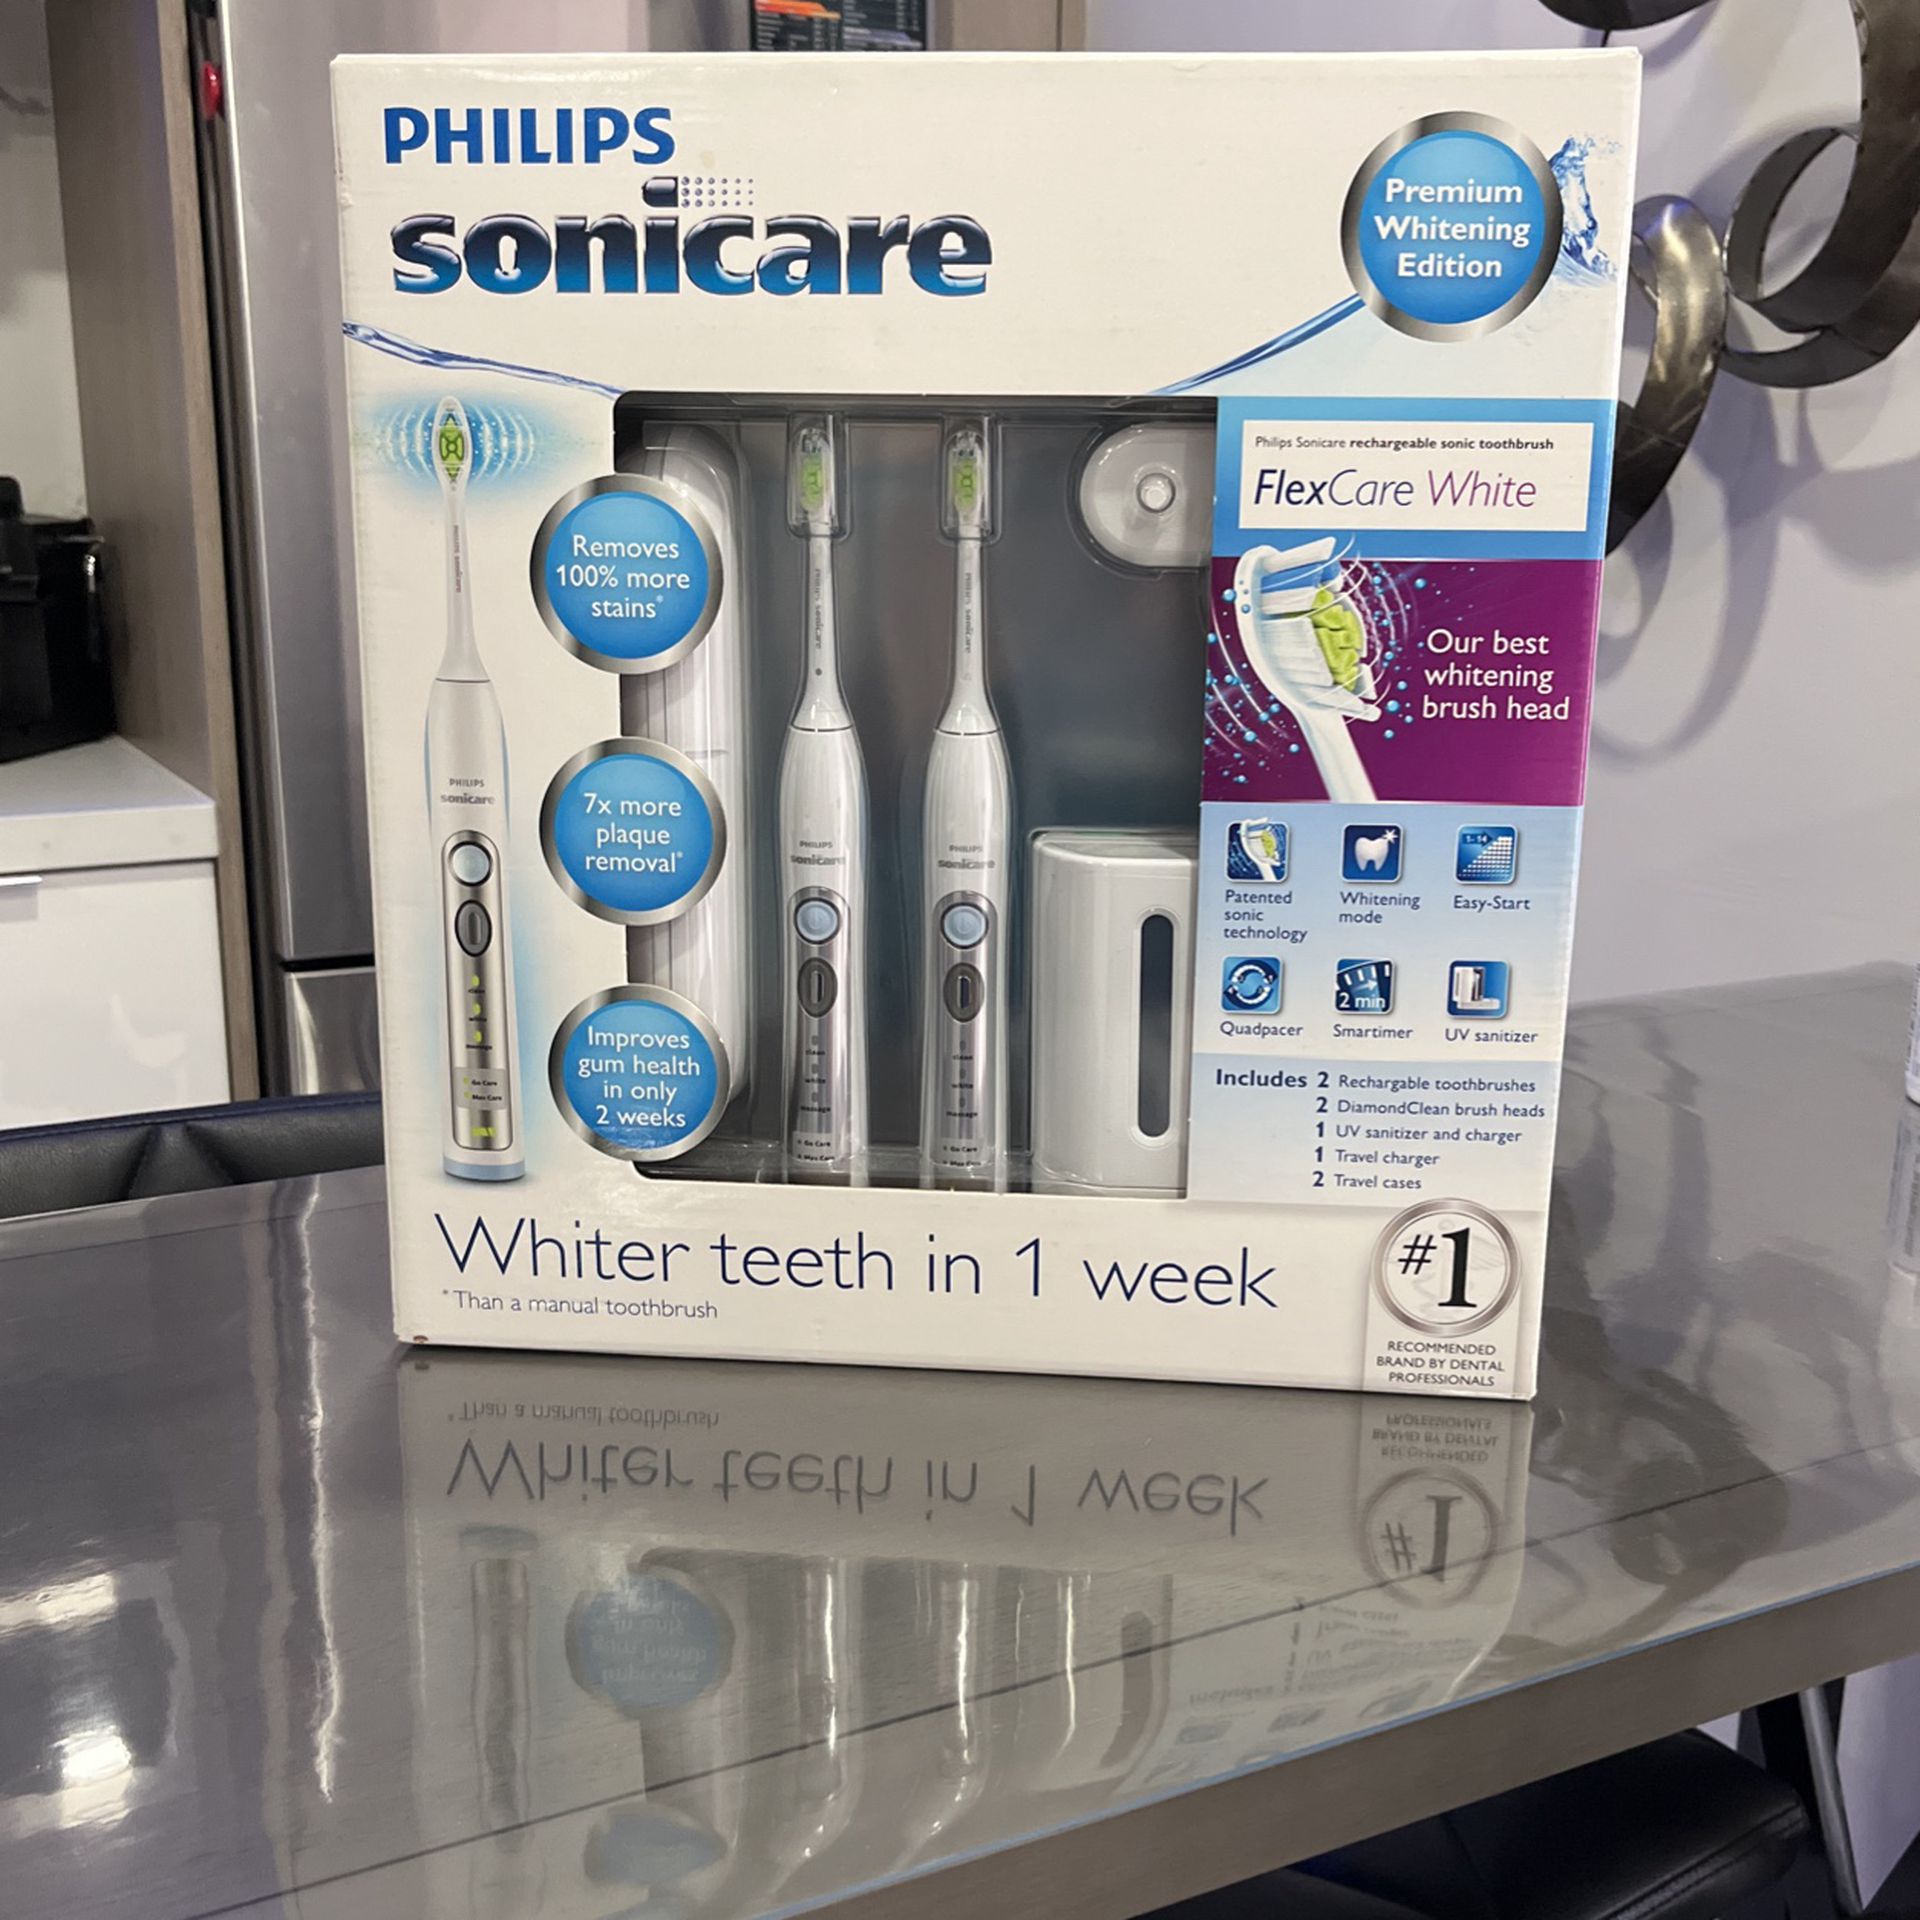 Philips /Premium Whitening Edition / Father’s Day Deal